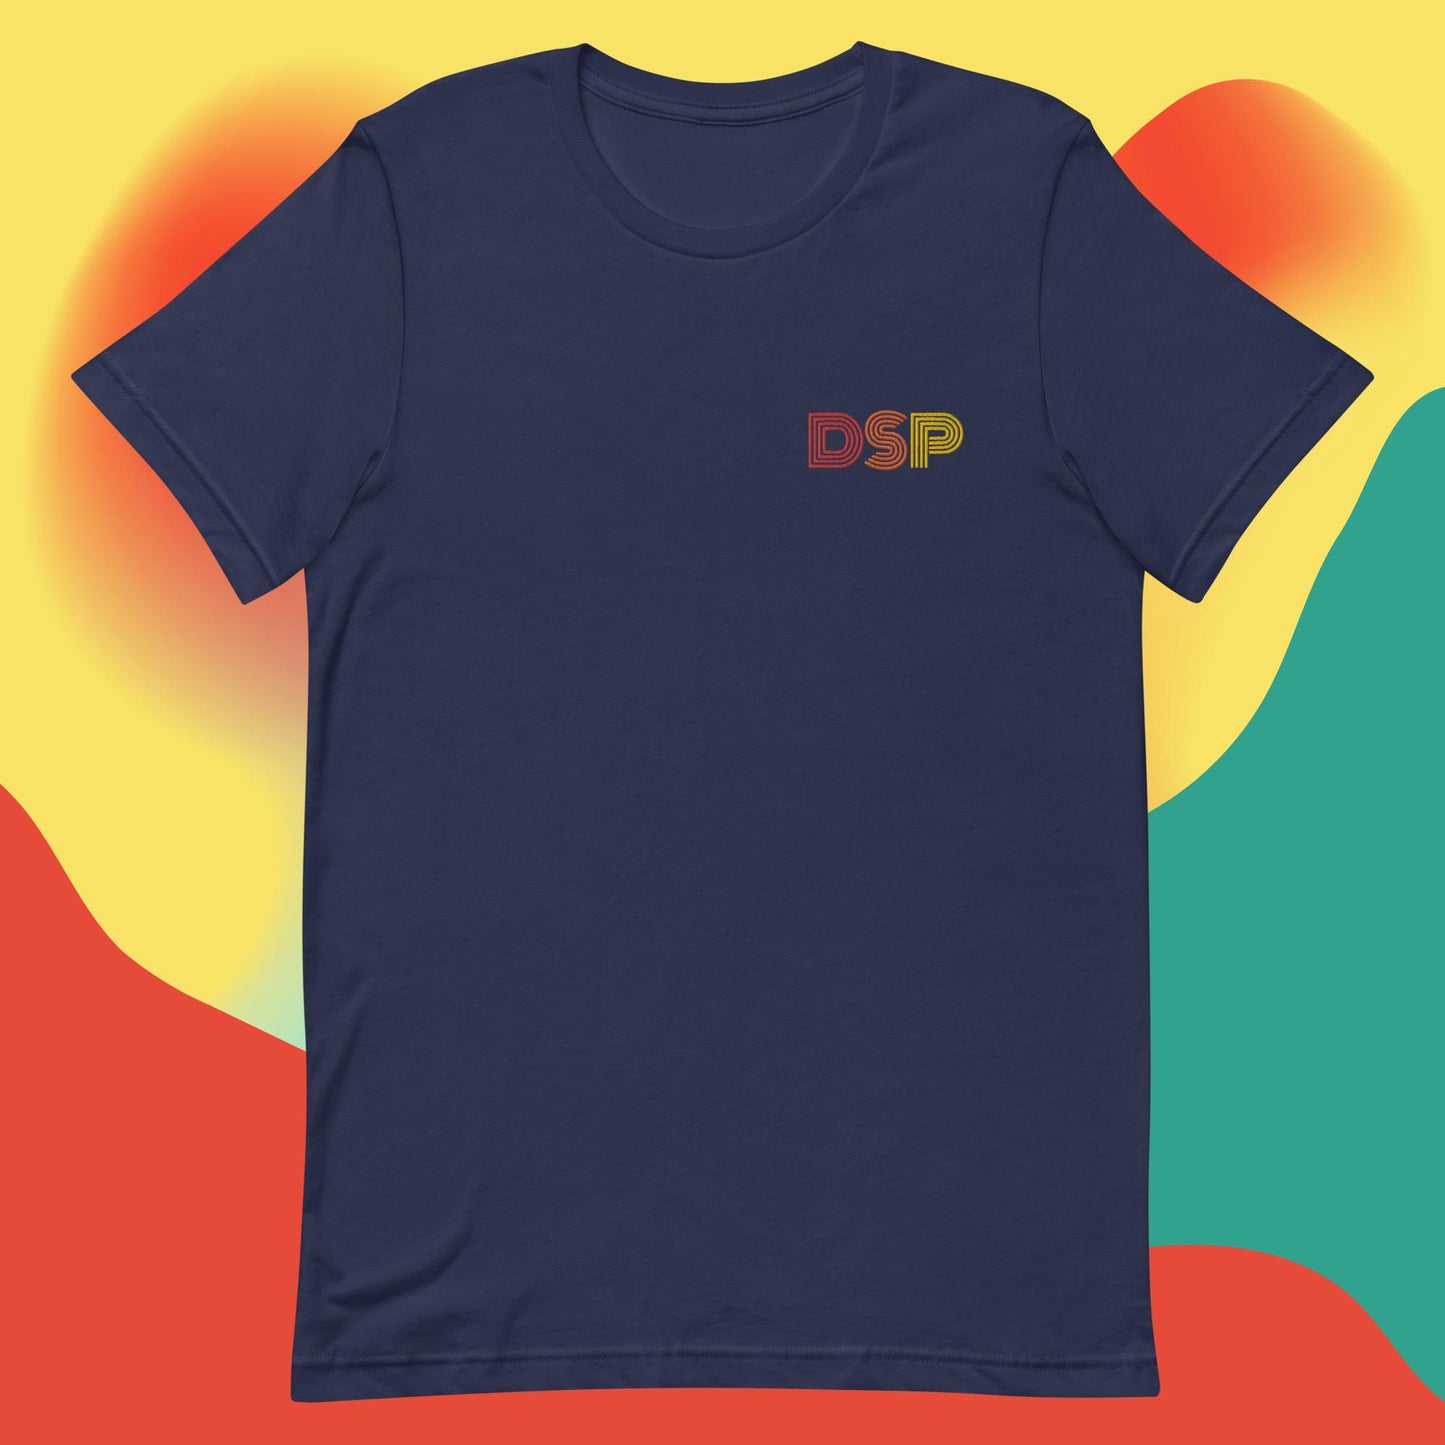 DSP T-shirt - Embroidered